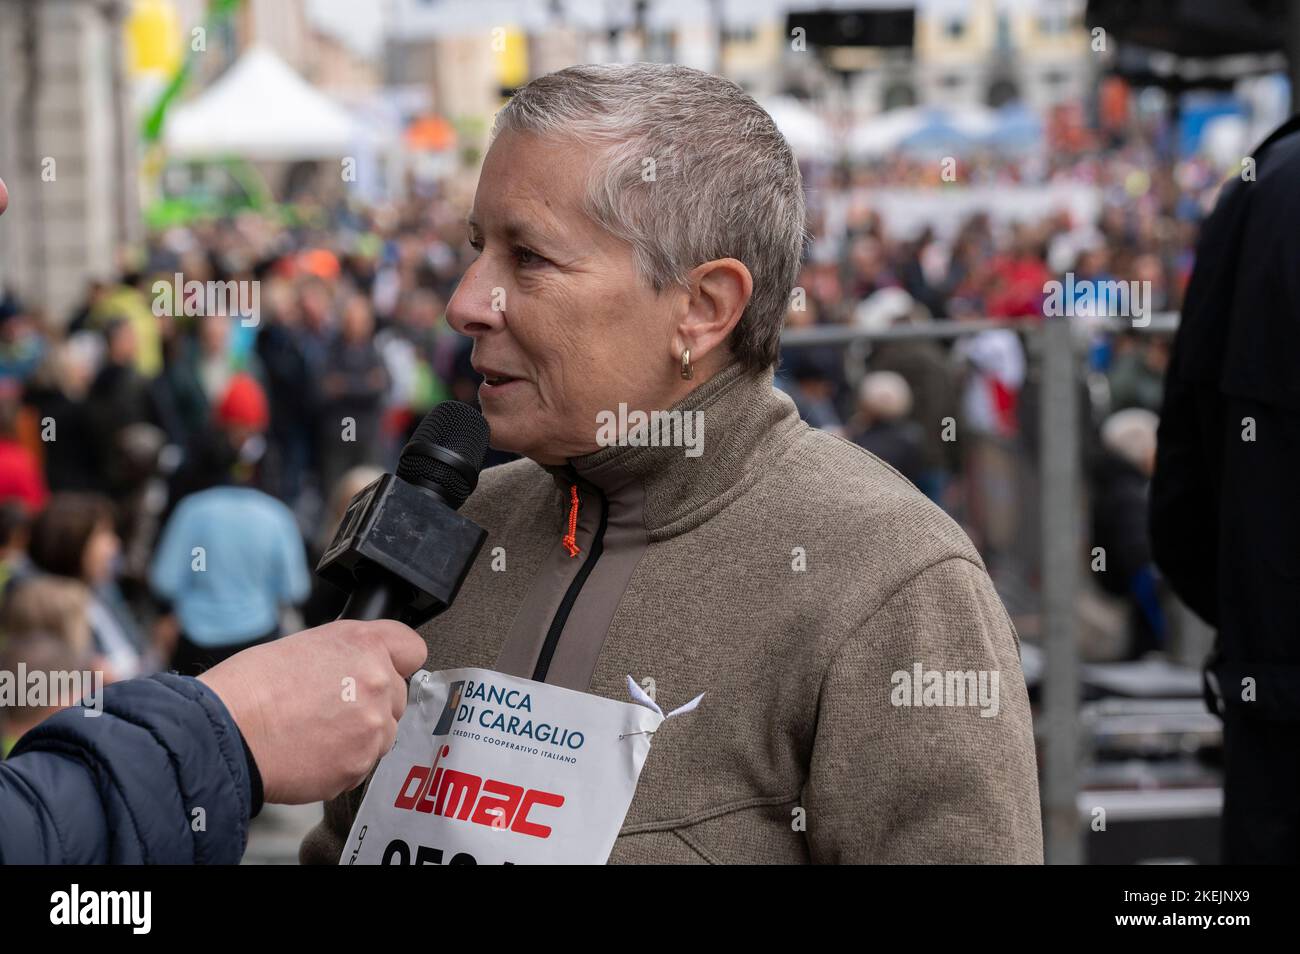 Cuneo, Italy. 13 November 2022. The mayor of Cuneo, Patrizia Manassero, during an interview made on the stage before the start of the Cuneo Marathon. Credit: Luca Prestia / Alamy Live News Stock Photo